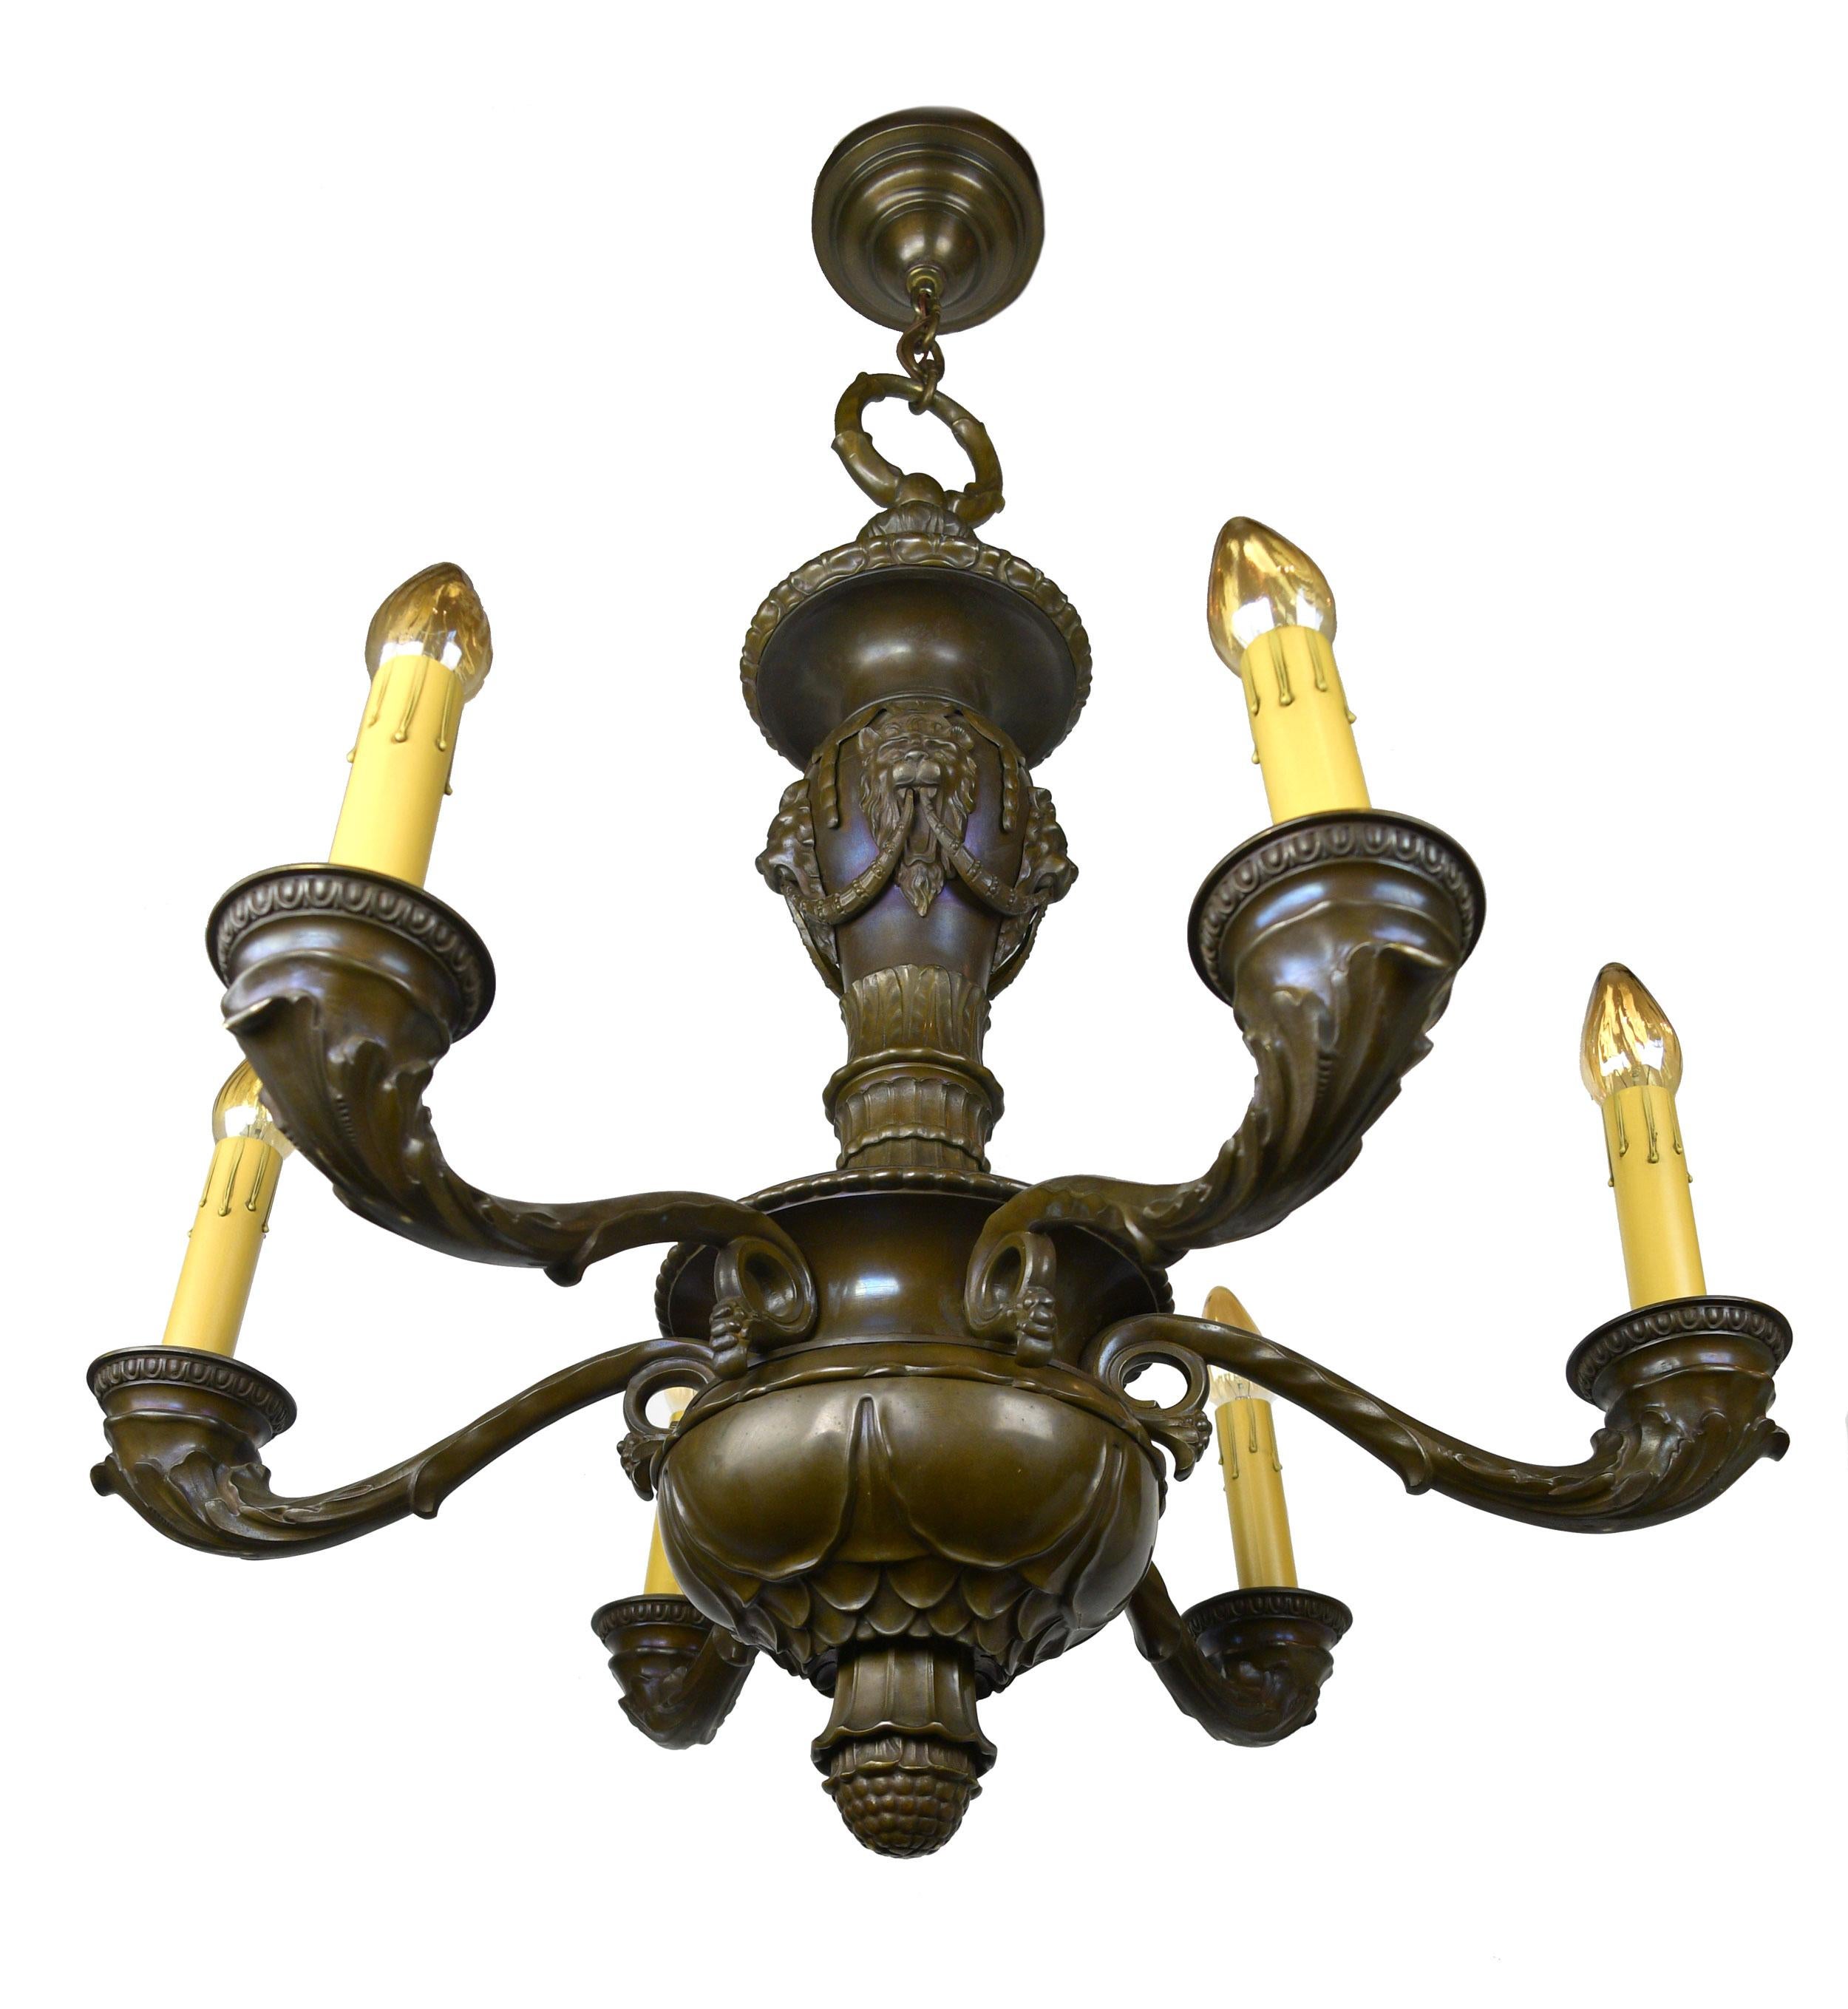 This cast bronze six candle chandelier has a grounding presence. Acanthus leaf arms curl at the body and flow out to hold the detailed basins of the candle holders. The lion quadrifrons are connected by Laurel wreaths with berries, both of which are